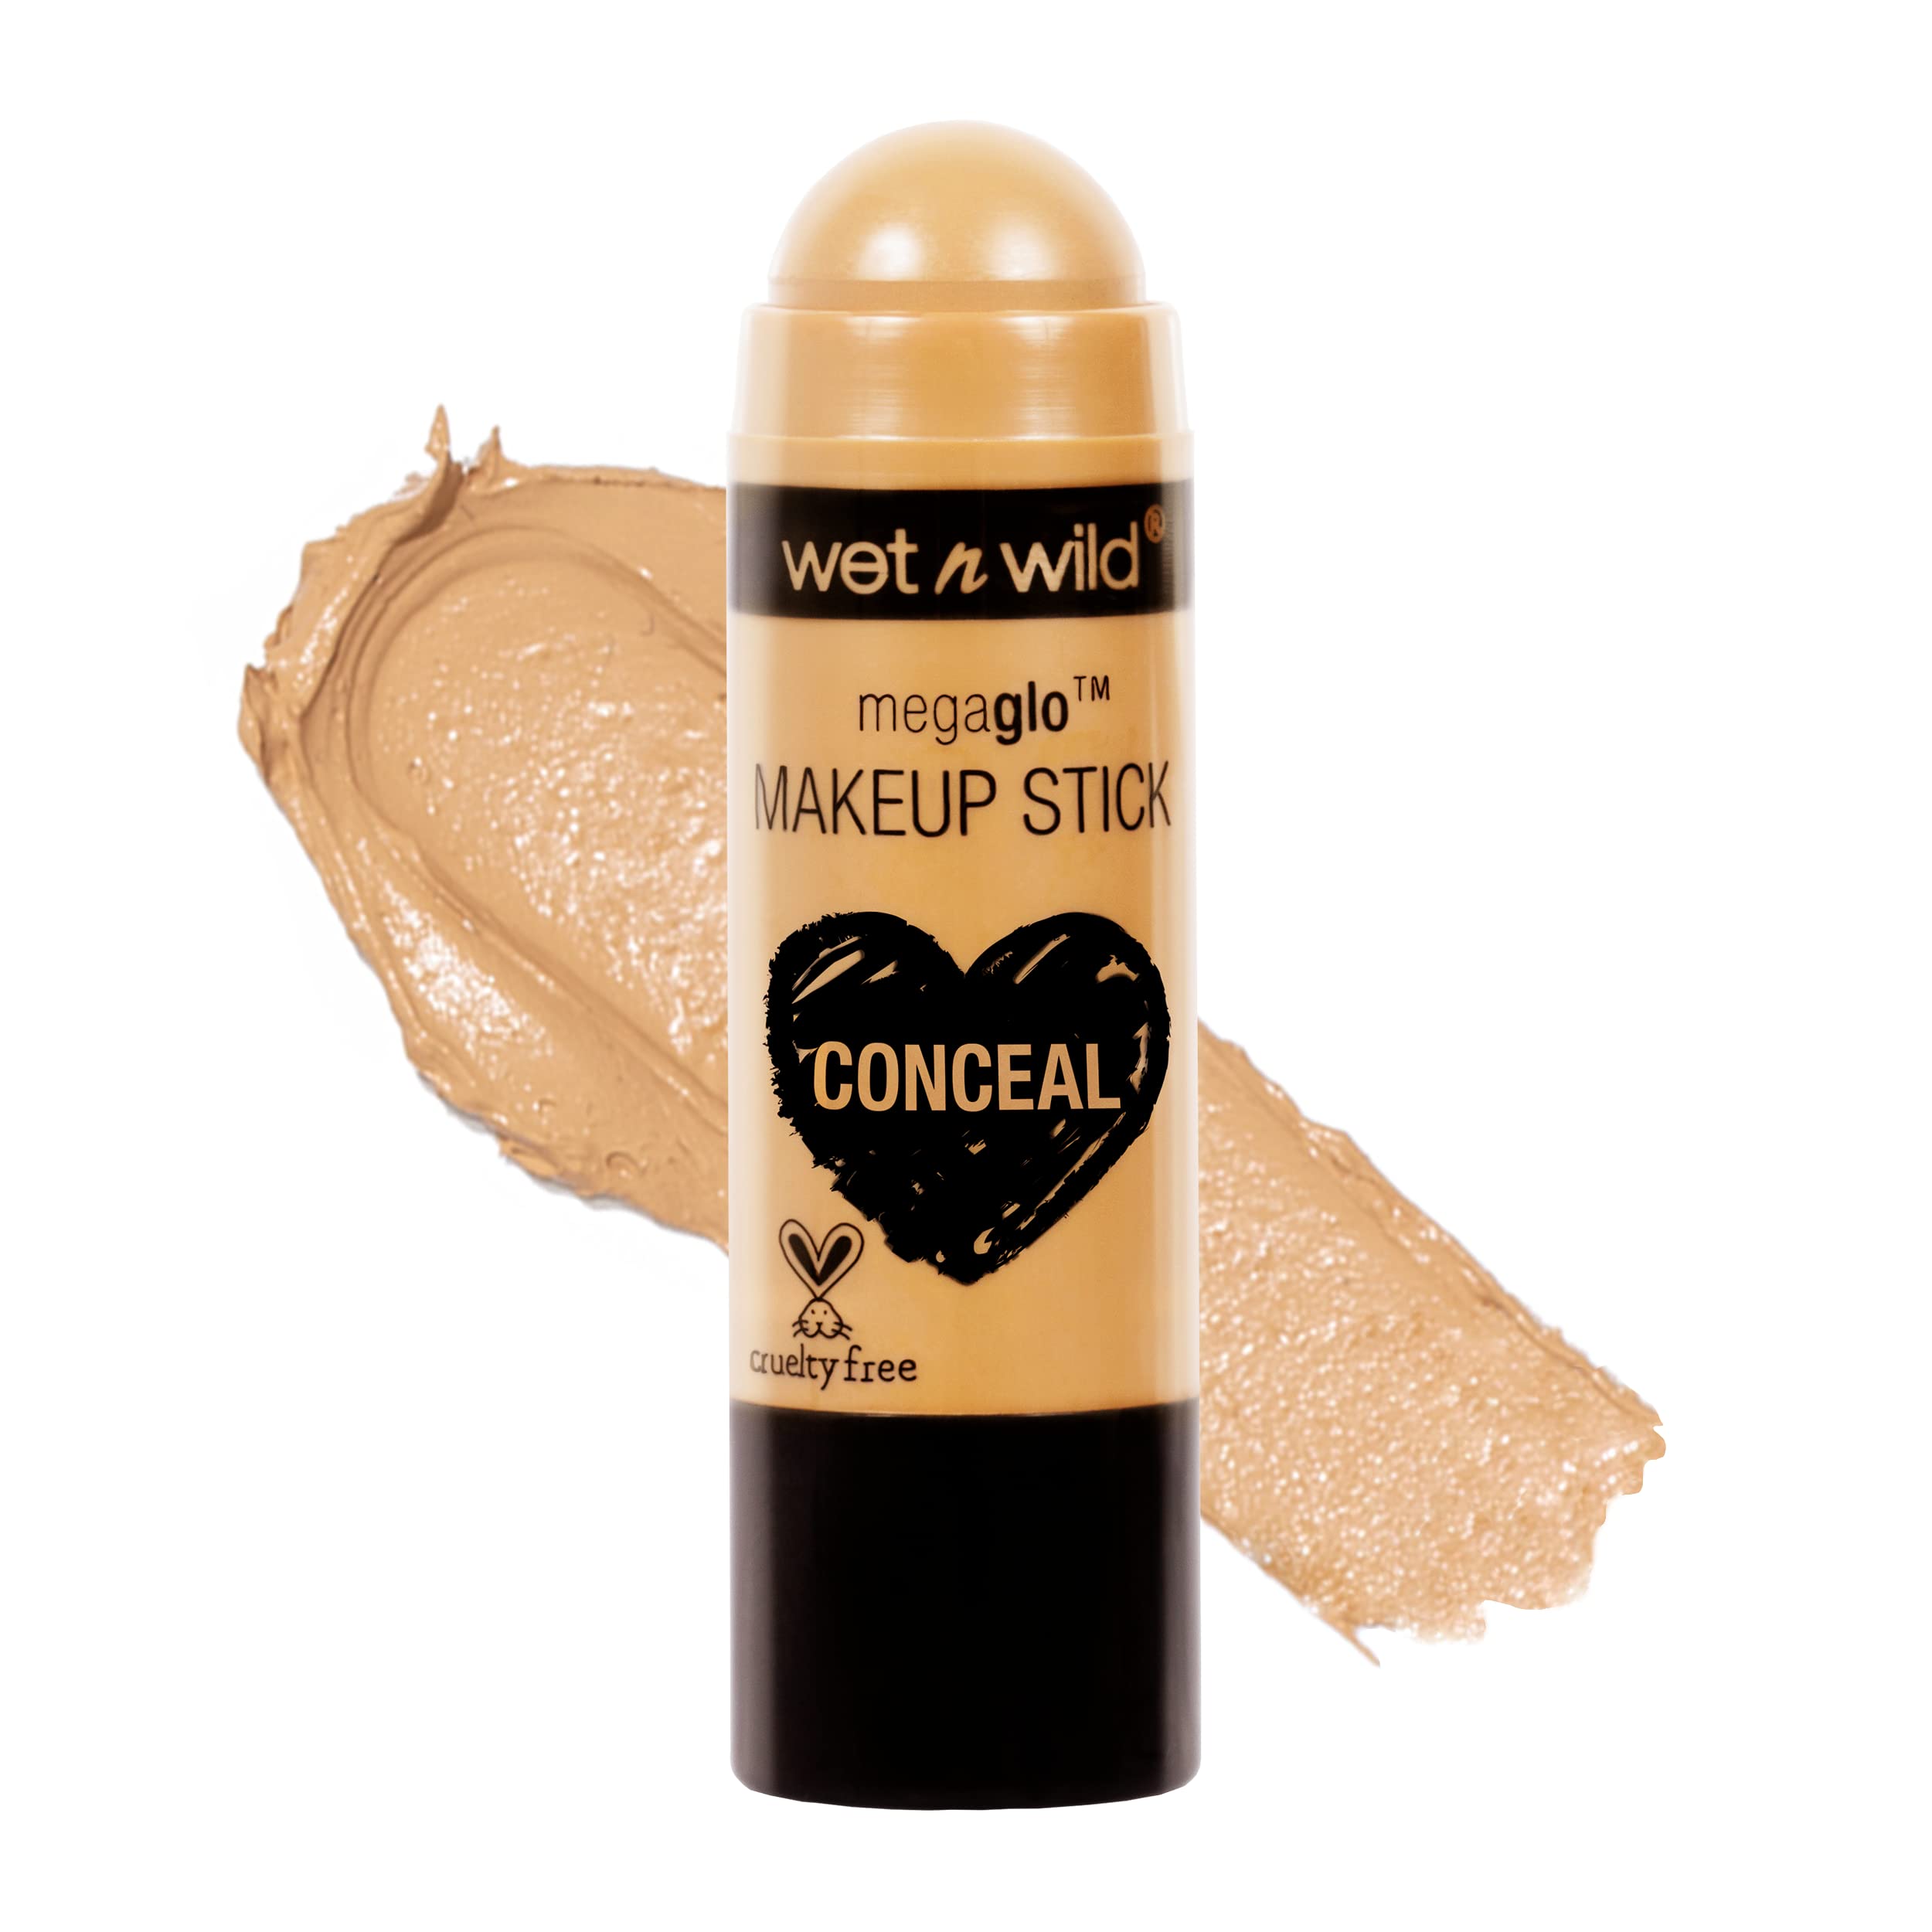 Wet n Wild MegaGlo Makeup Stick Conceal and Contour Neutral You're A Natural,1.1 Ounce (Pack of 1),809